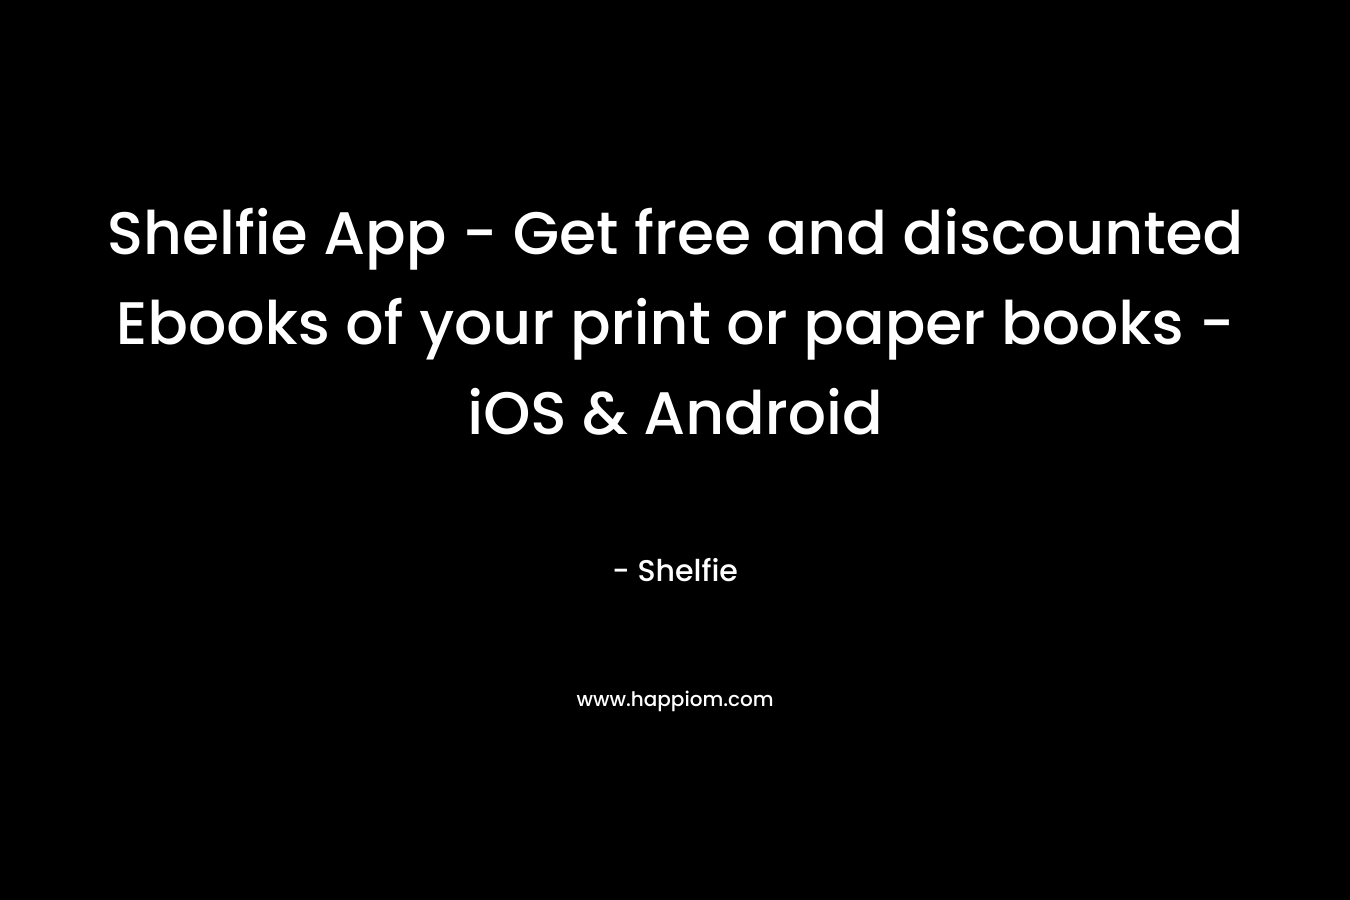 Shelfie App – Get free and discounted Ebooks of your print or paper books – iOS & Android – Shelfie